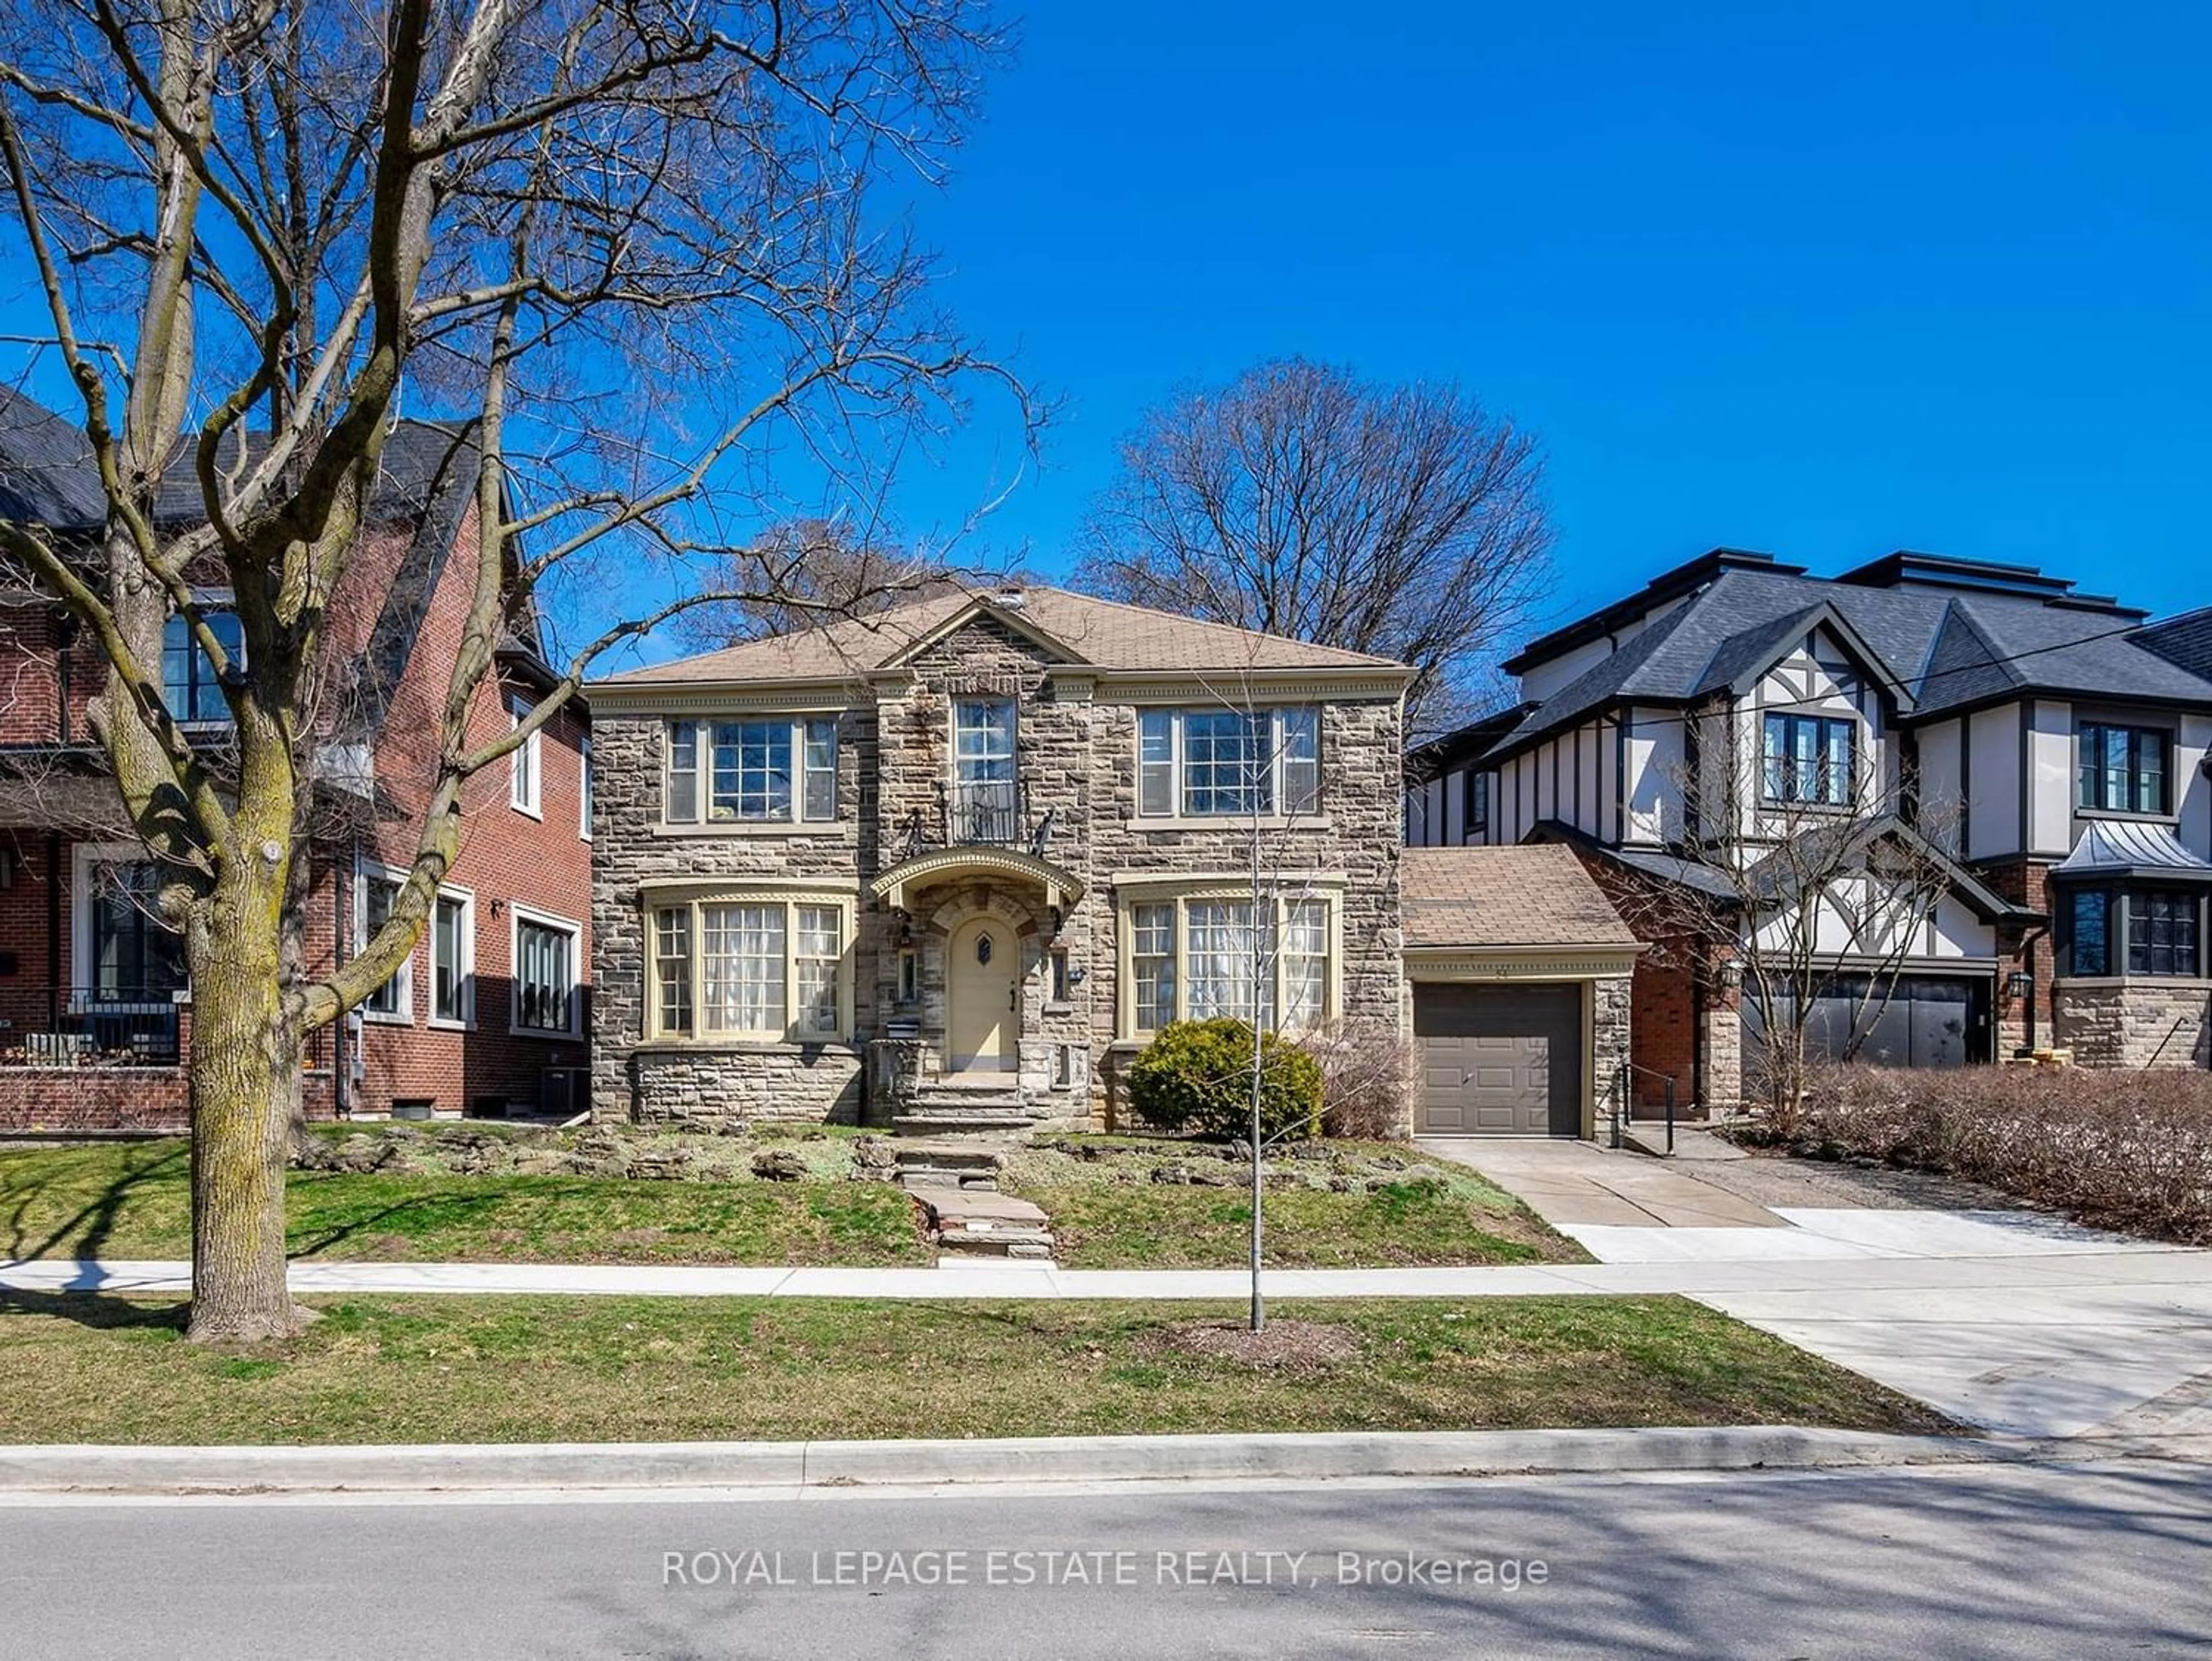 Home with brick exterior material for 54 Strathearn Rd, Toronto Ontario M6C 1R6